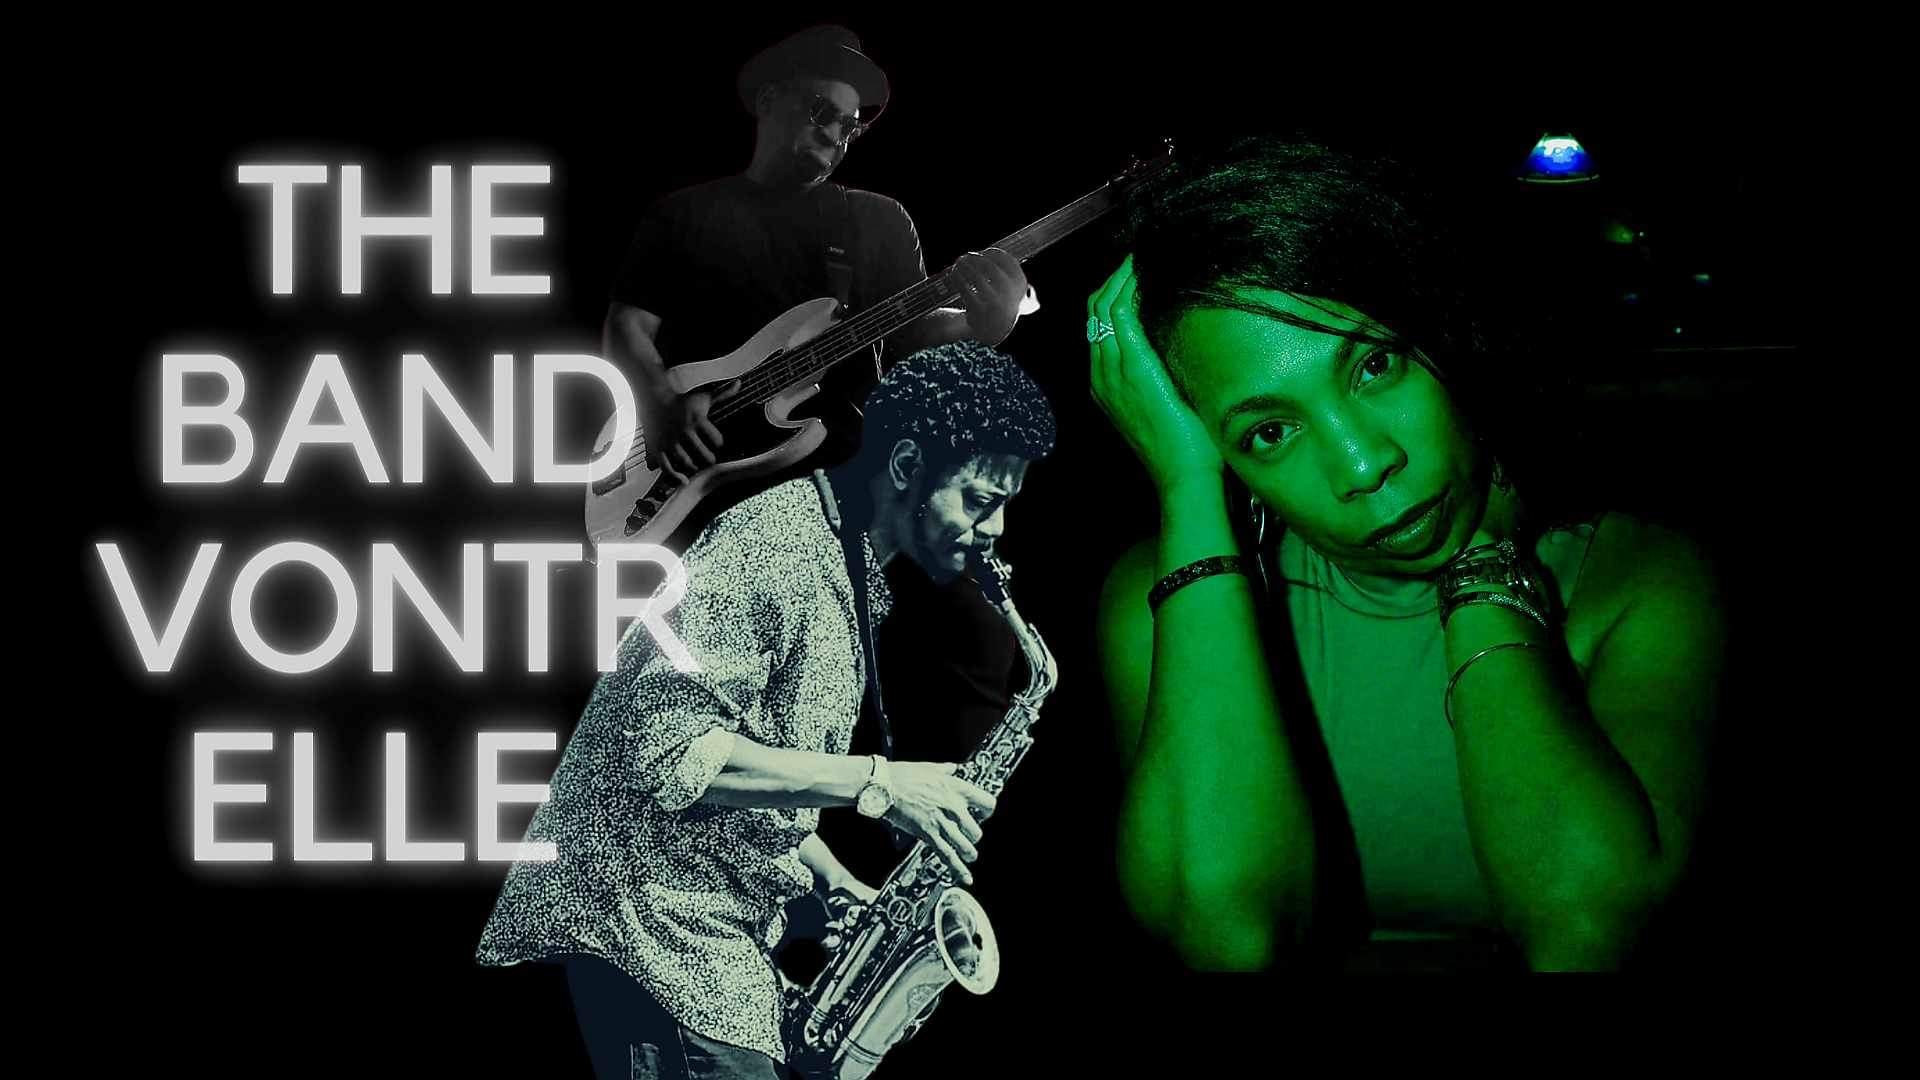 Vontrelle, saxophone player and guitar player against black background